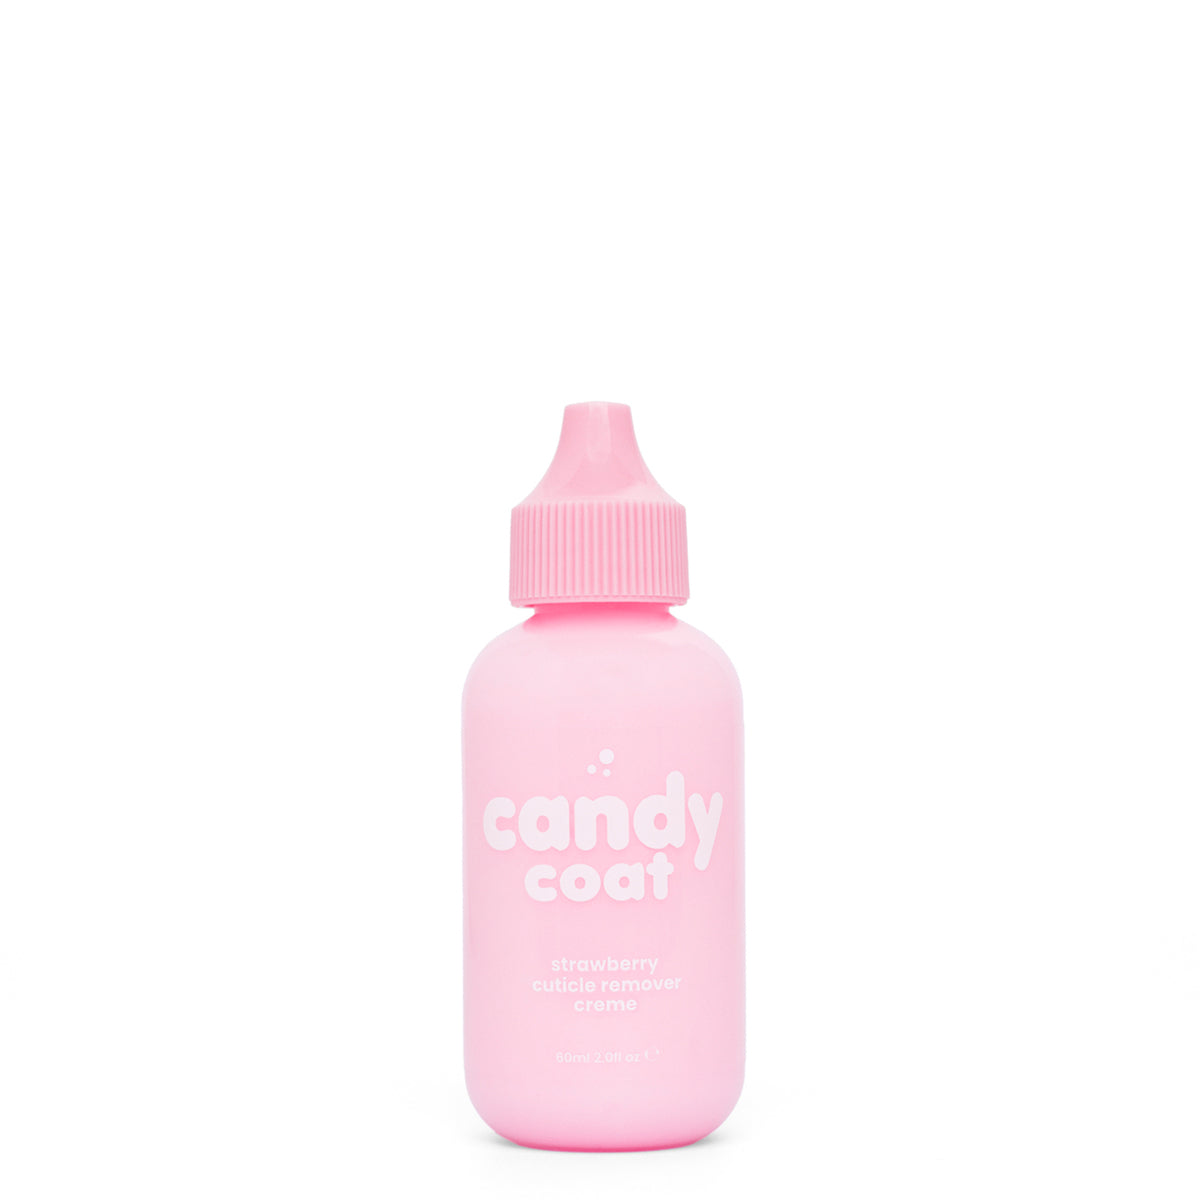 Candy Coat - Cuticle Remover Creme